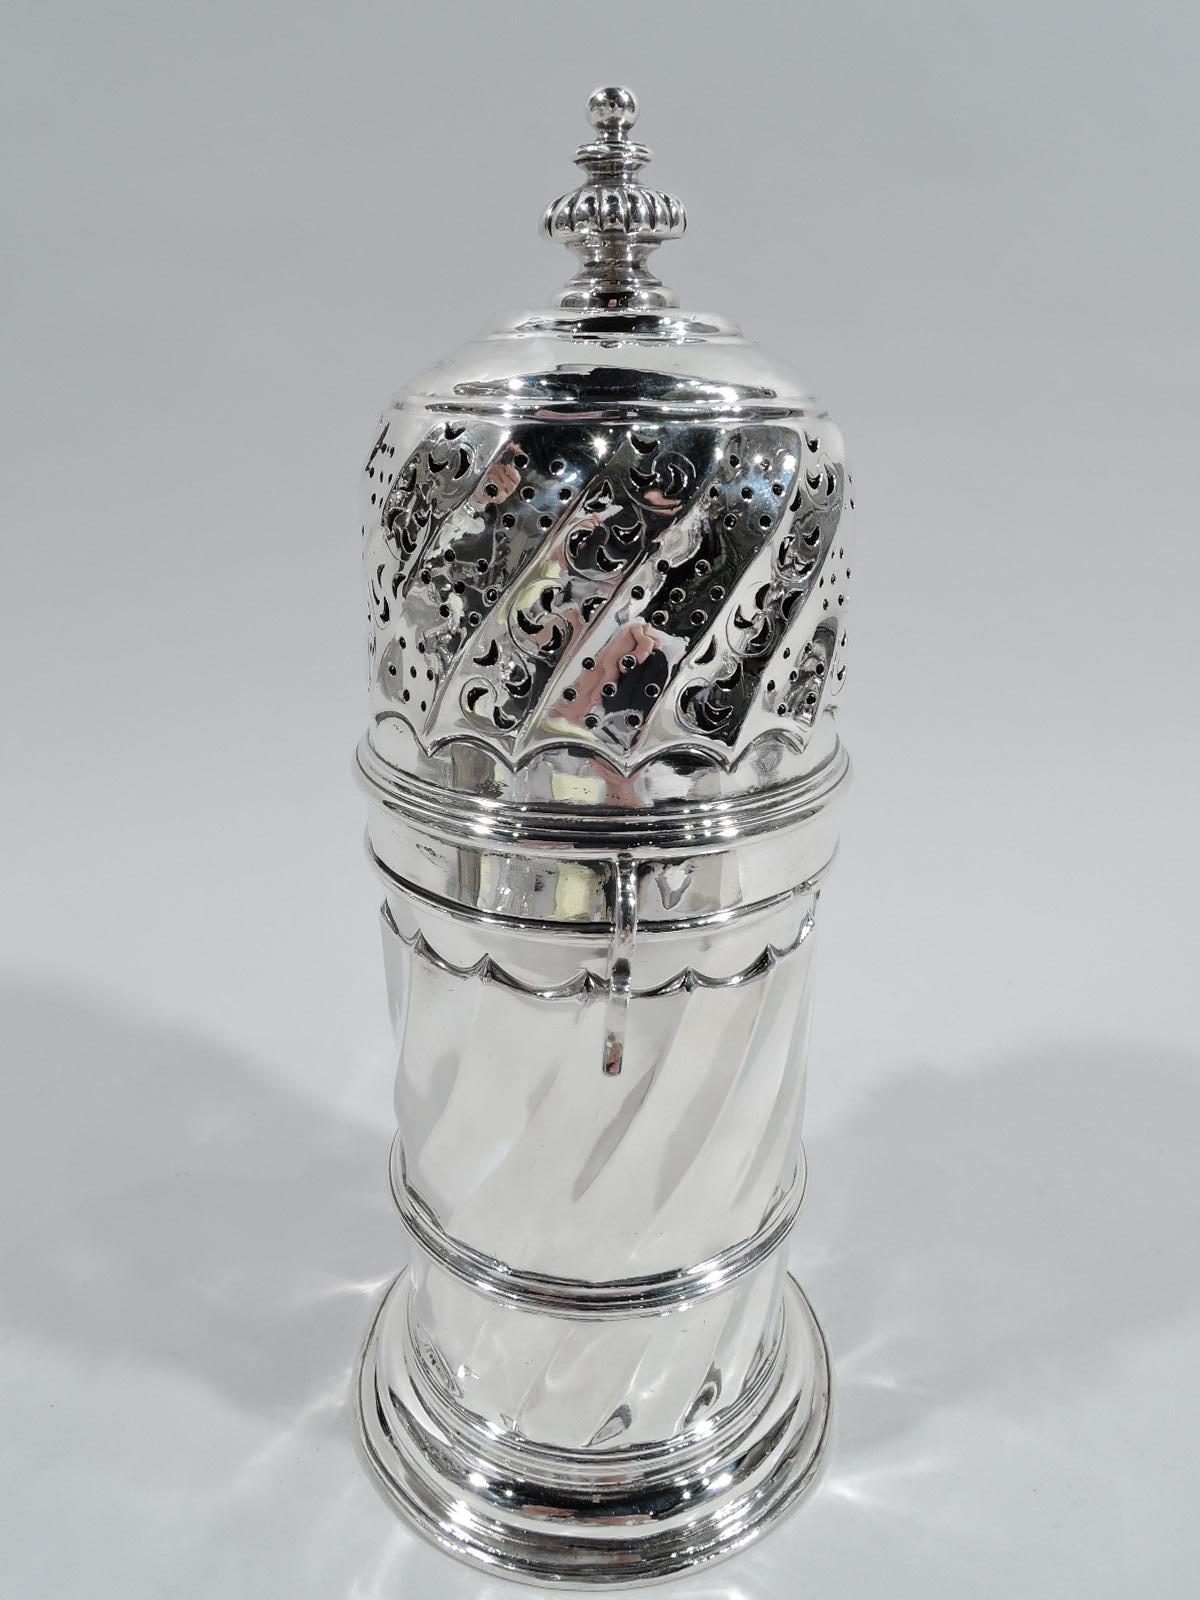 Victorian Classical sugar caster. Made by William Gibson & John Langman in London in 1893. Girdled body on stepped foot. Twisted fluting with scalloped borders. Cover has ornamental piercing and finial. Initials EAW engraved on underside. Elegant